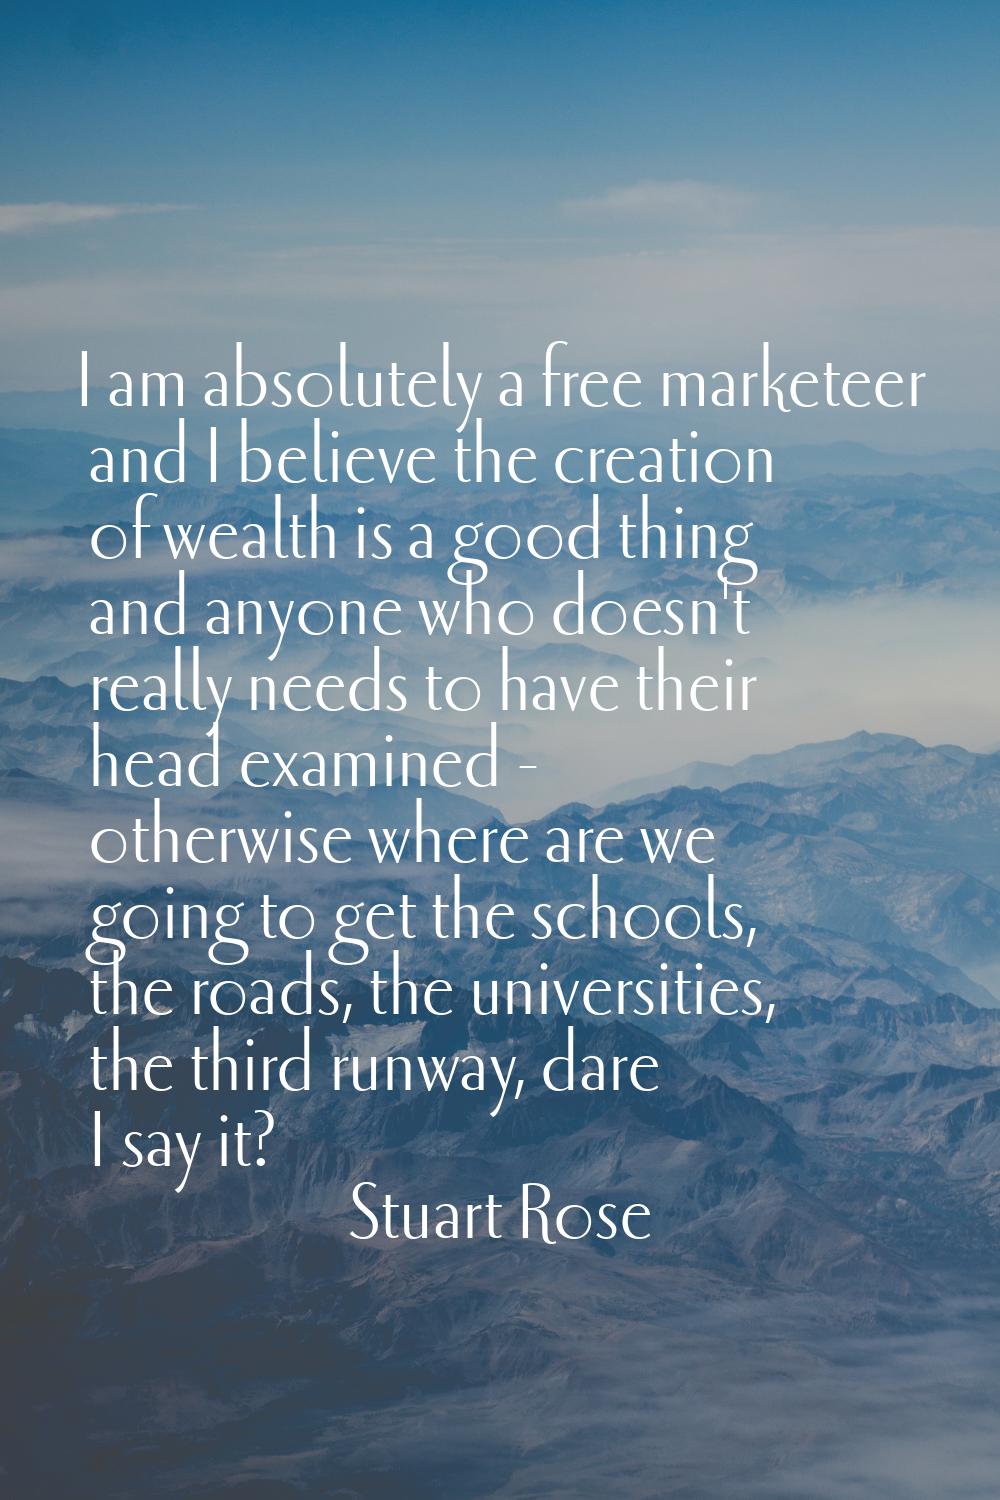 I am absolutely a free marketeer and I believe the creation of wealth is a good thing and anyone wh